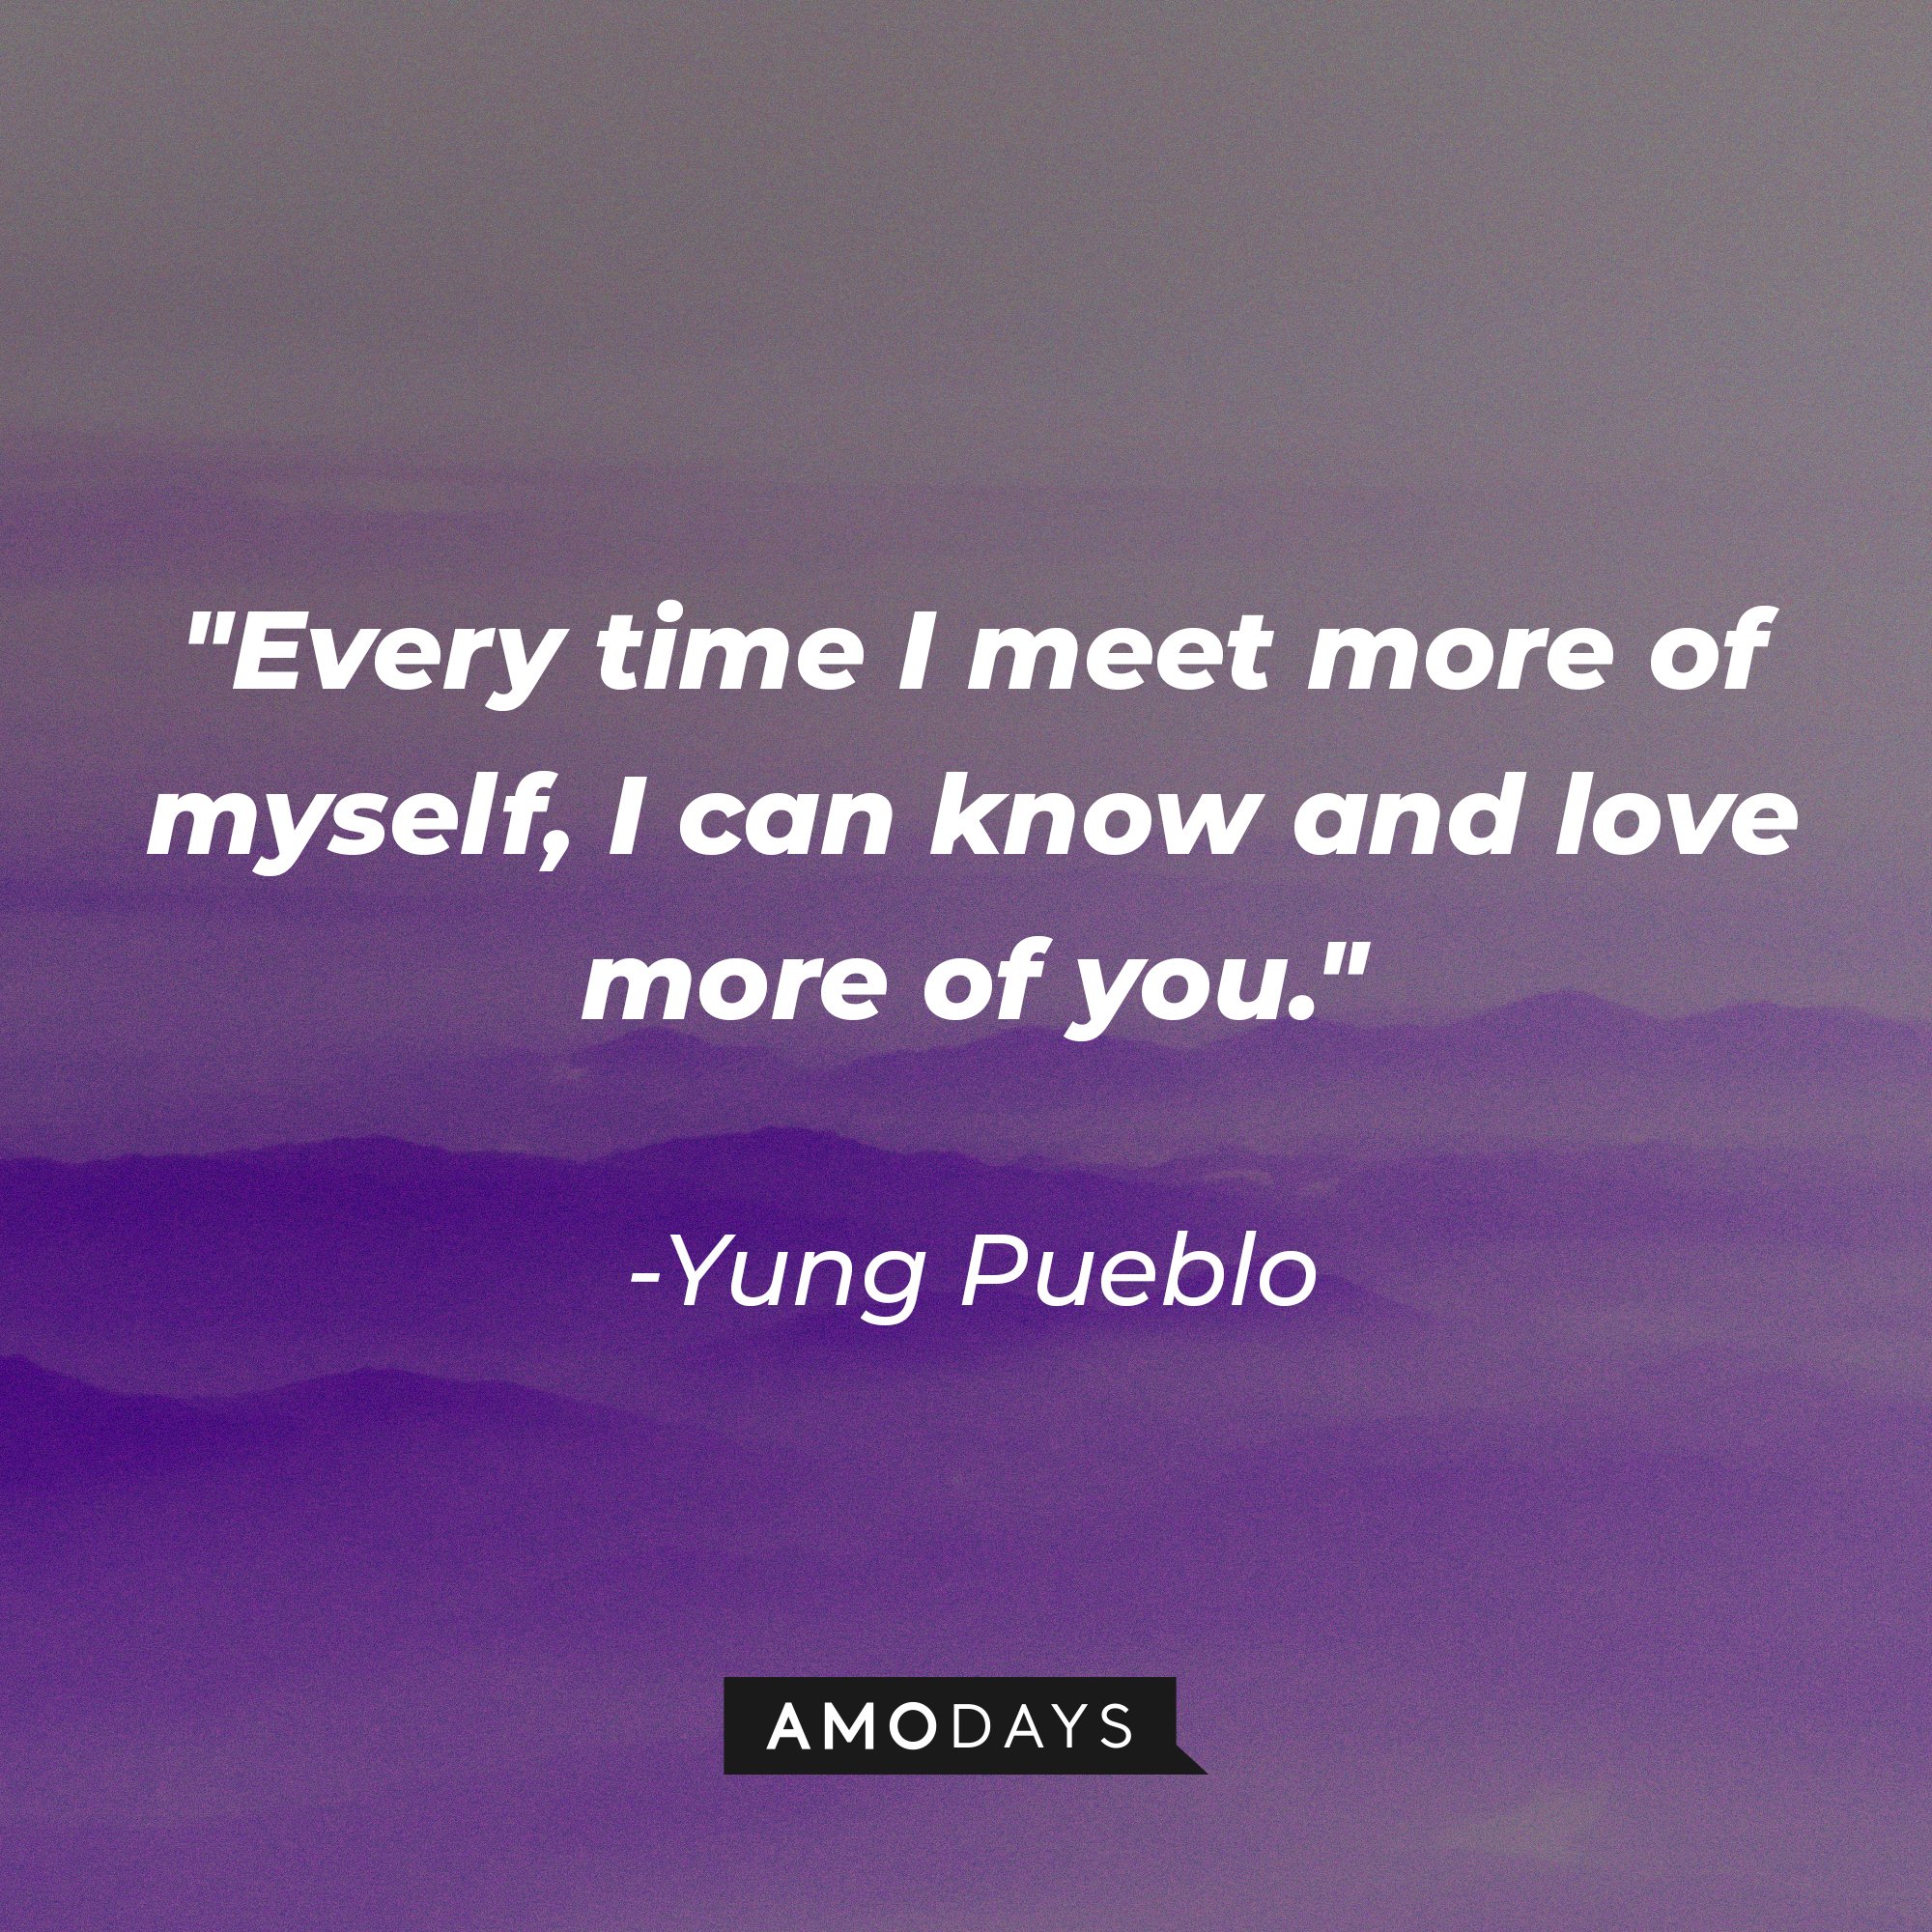 Yung Pueblo's quote "Every time I meet more of myself, I can know and love more of you." | Source: Unsplash.com